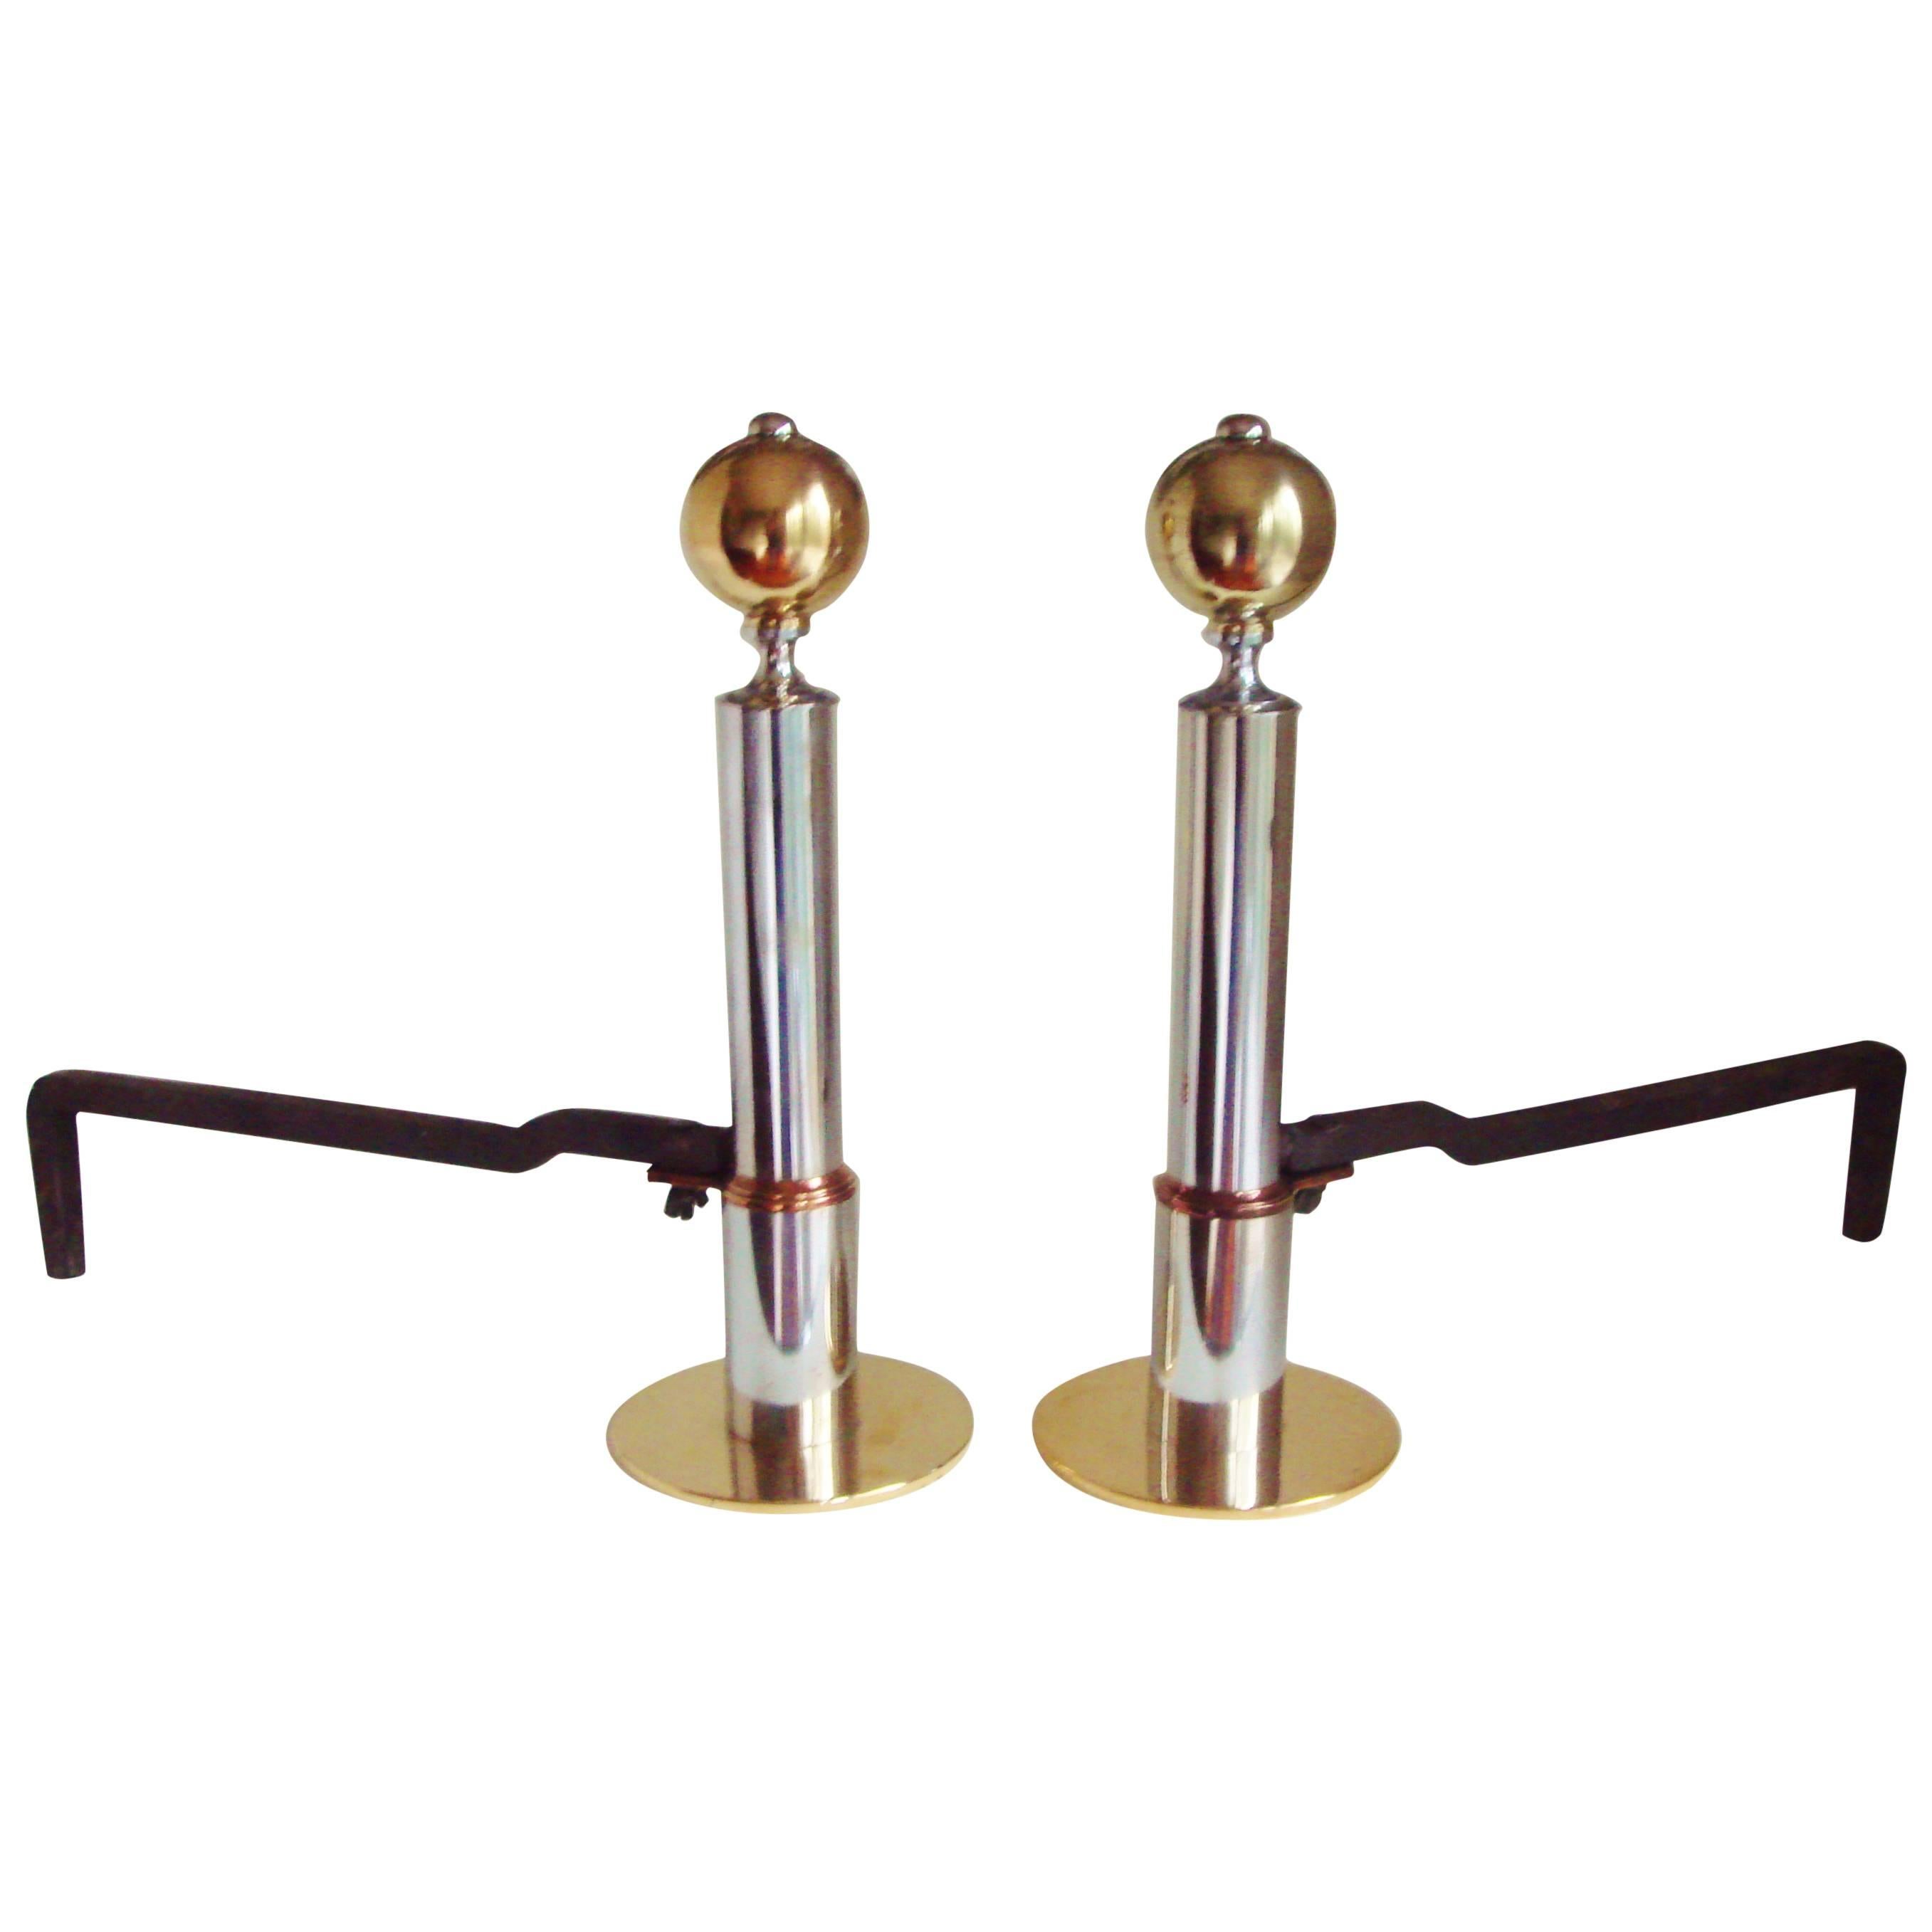 Pair of American Art Deco Andirons in Brass, Copper, Chrome and Iron. 